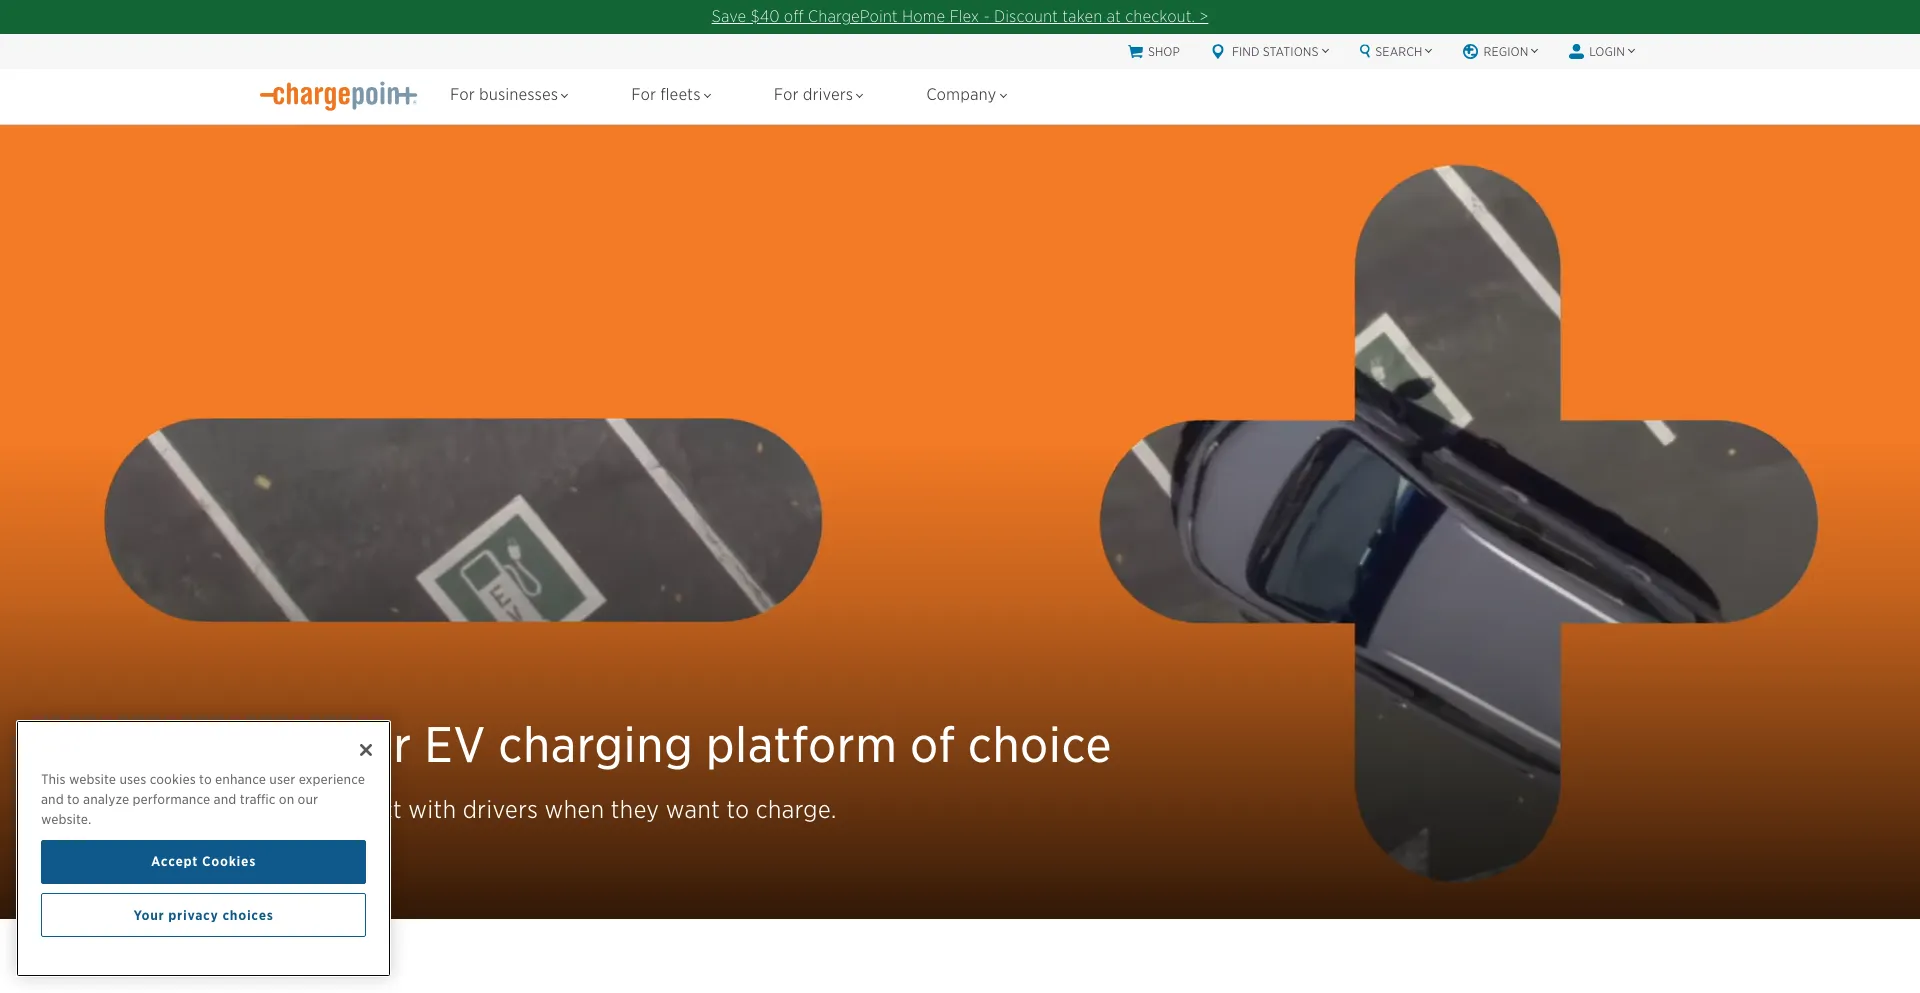 chargepoint.com